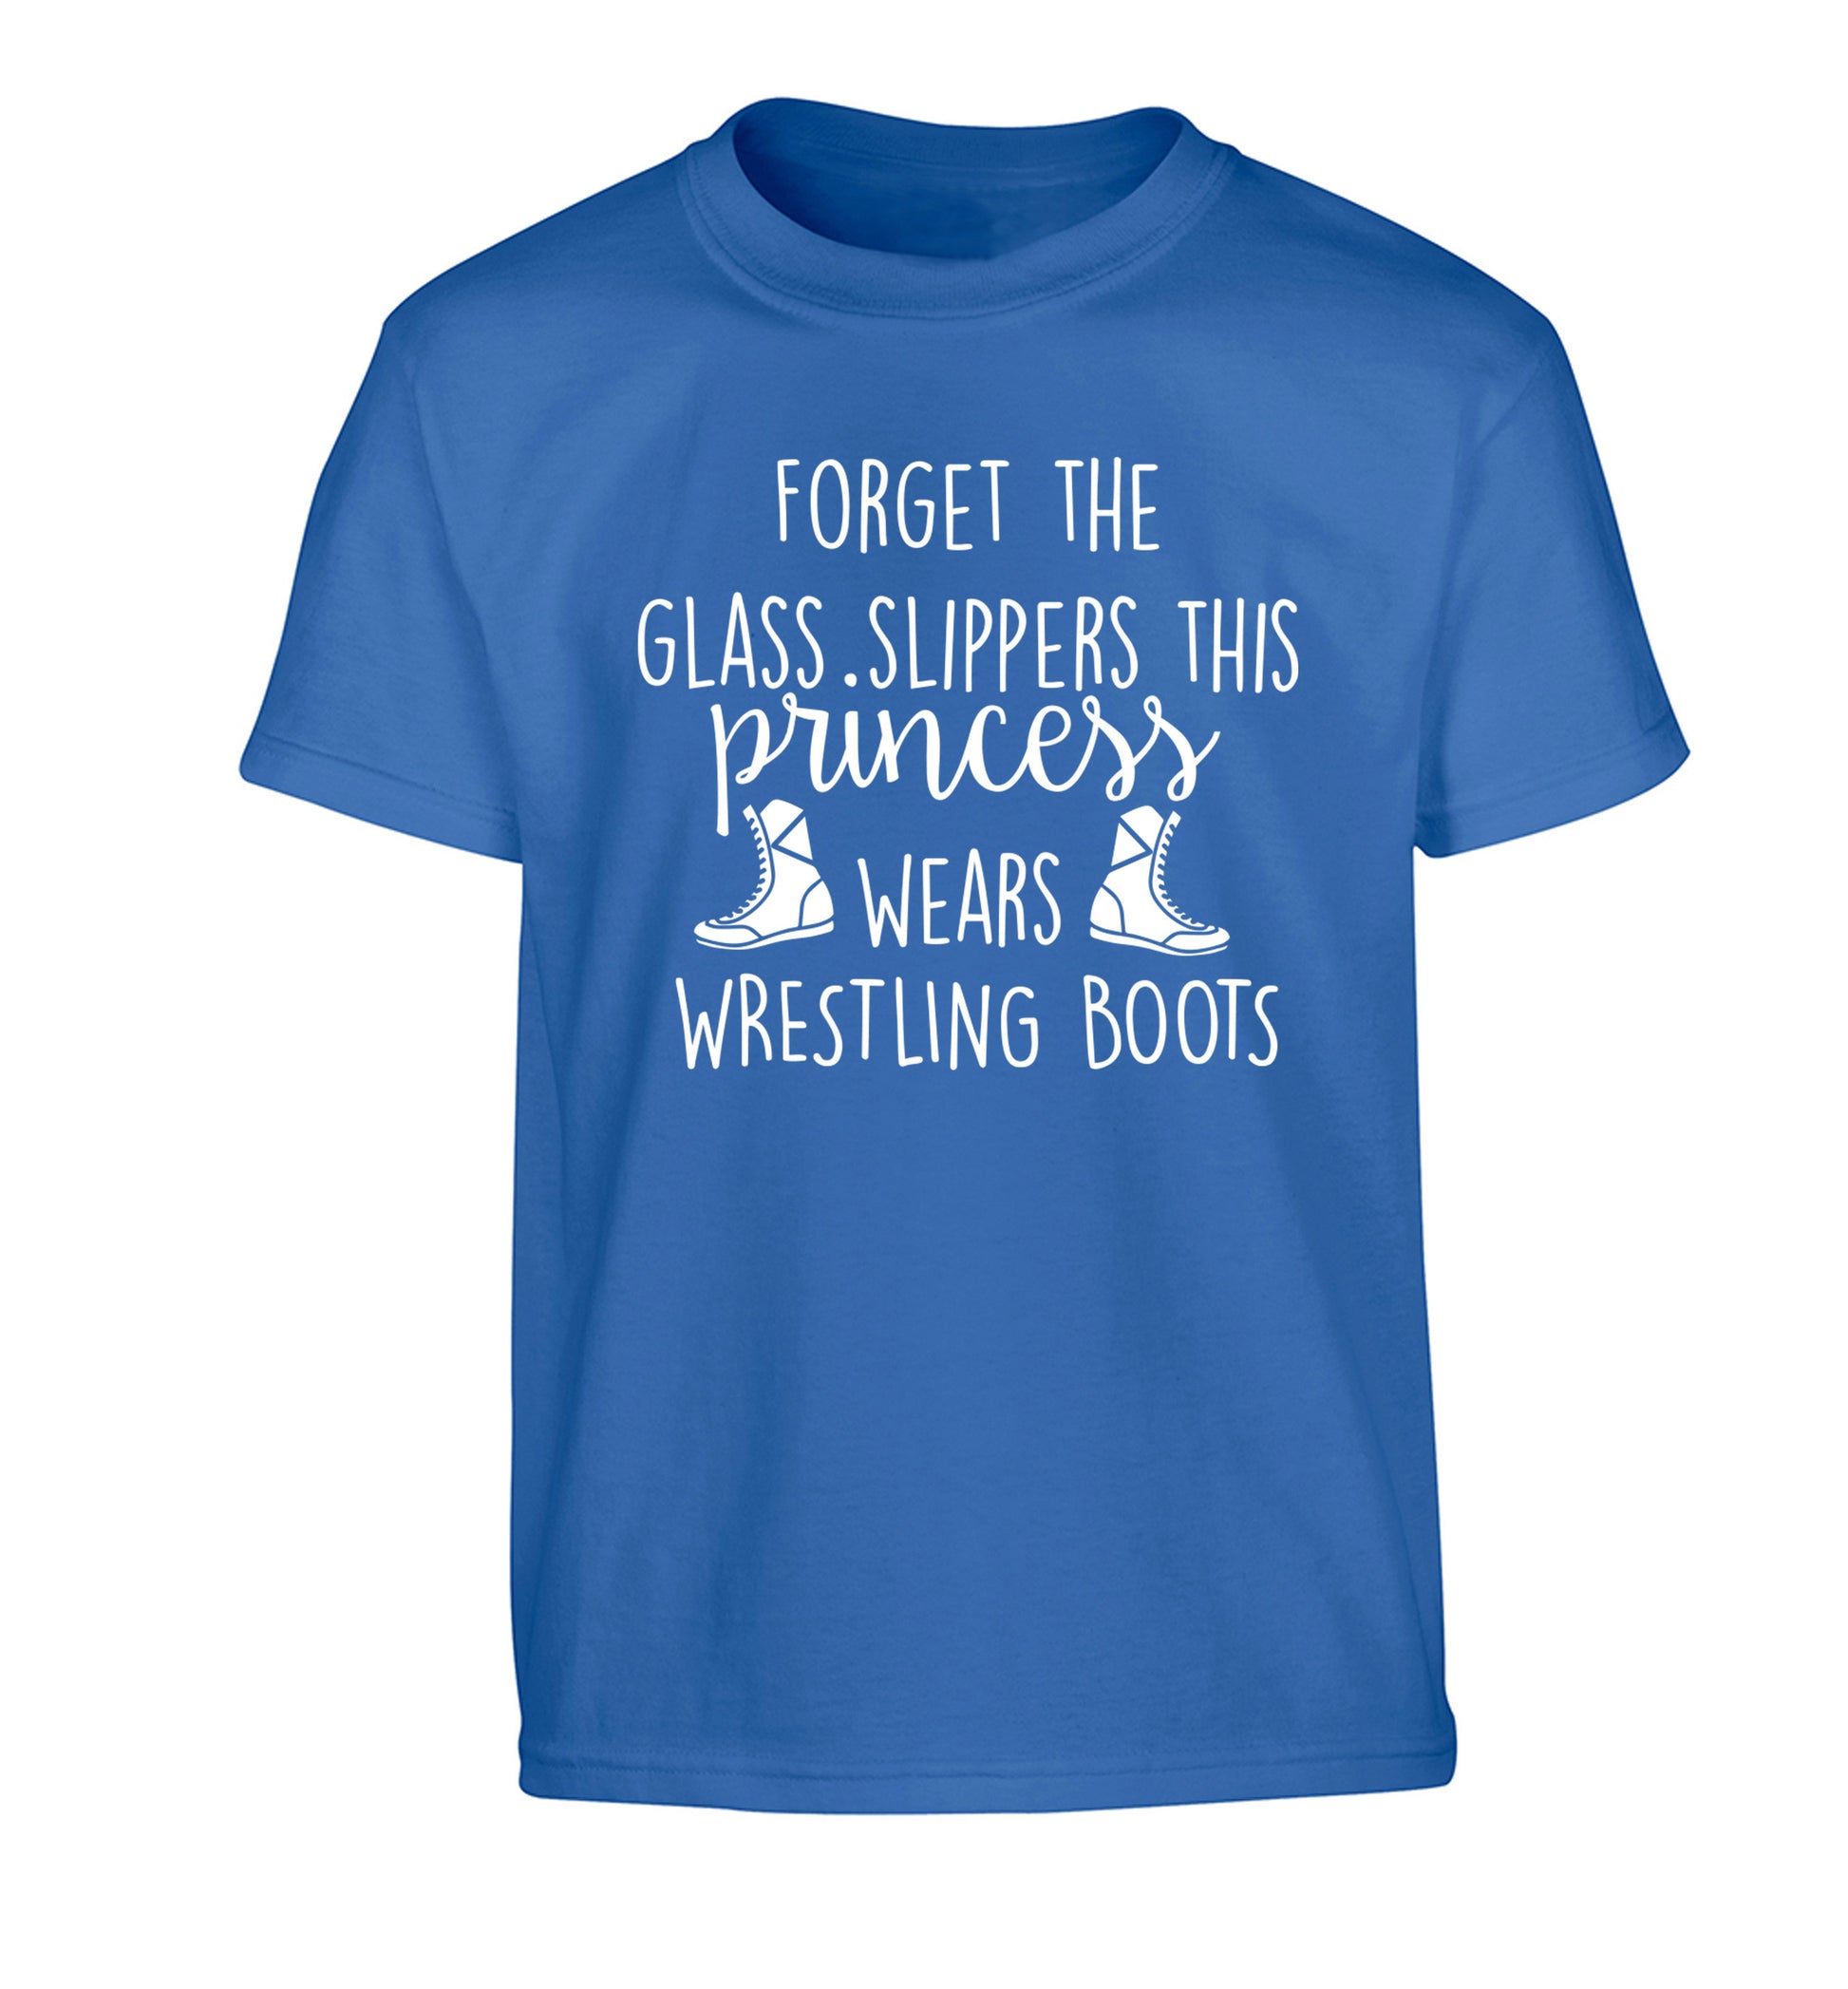 Forget the glass slippers this princess wears wrestling boots Children's blue Tshirt 12-14 Years